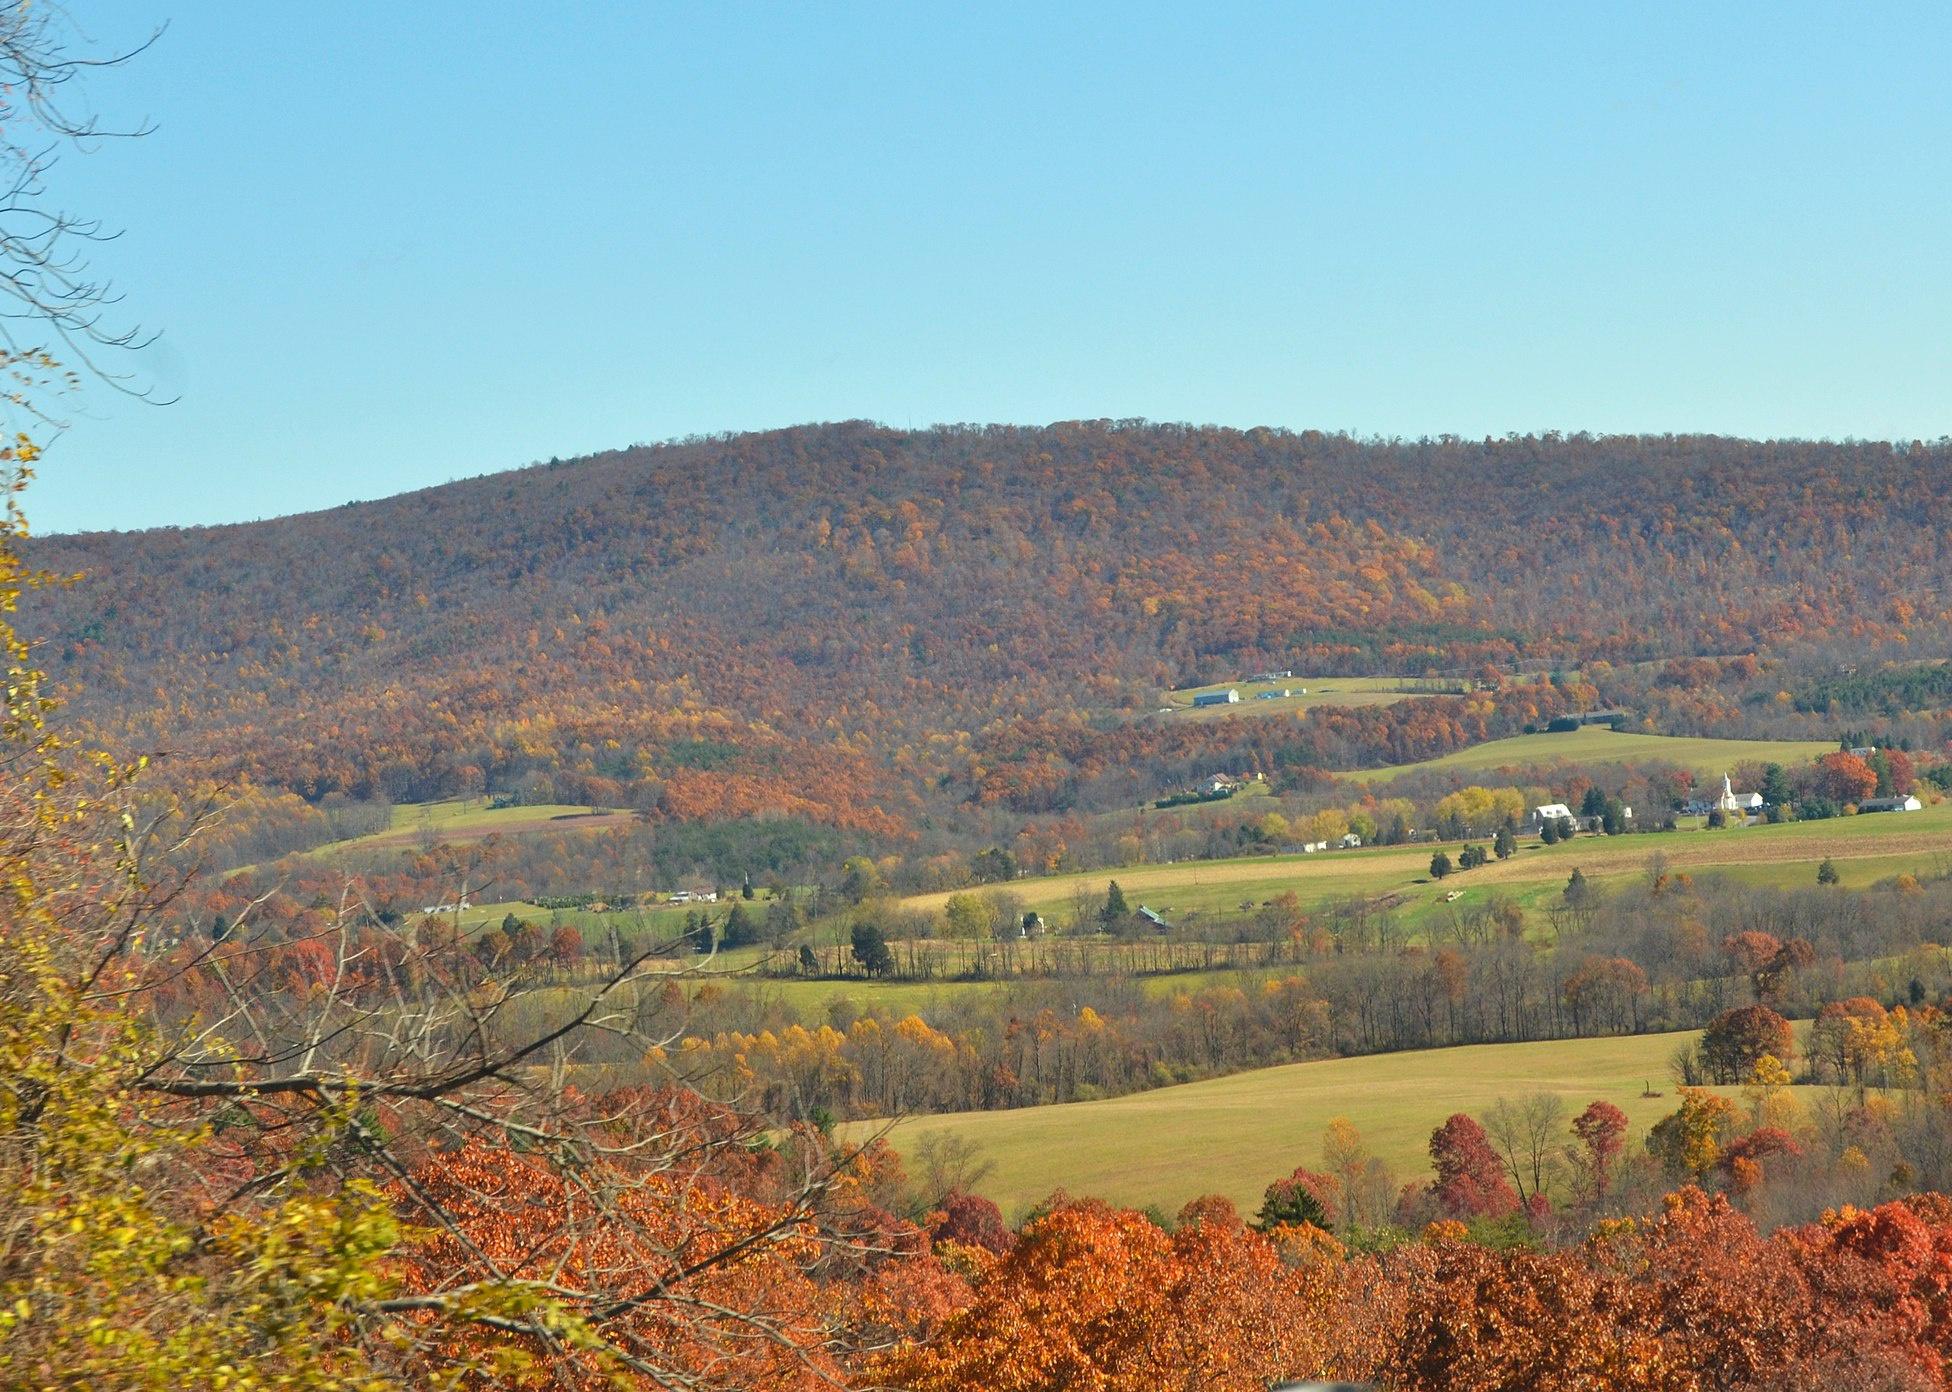 Homes and farms spread out on a Fall colored hillside.